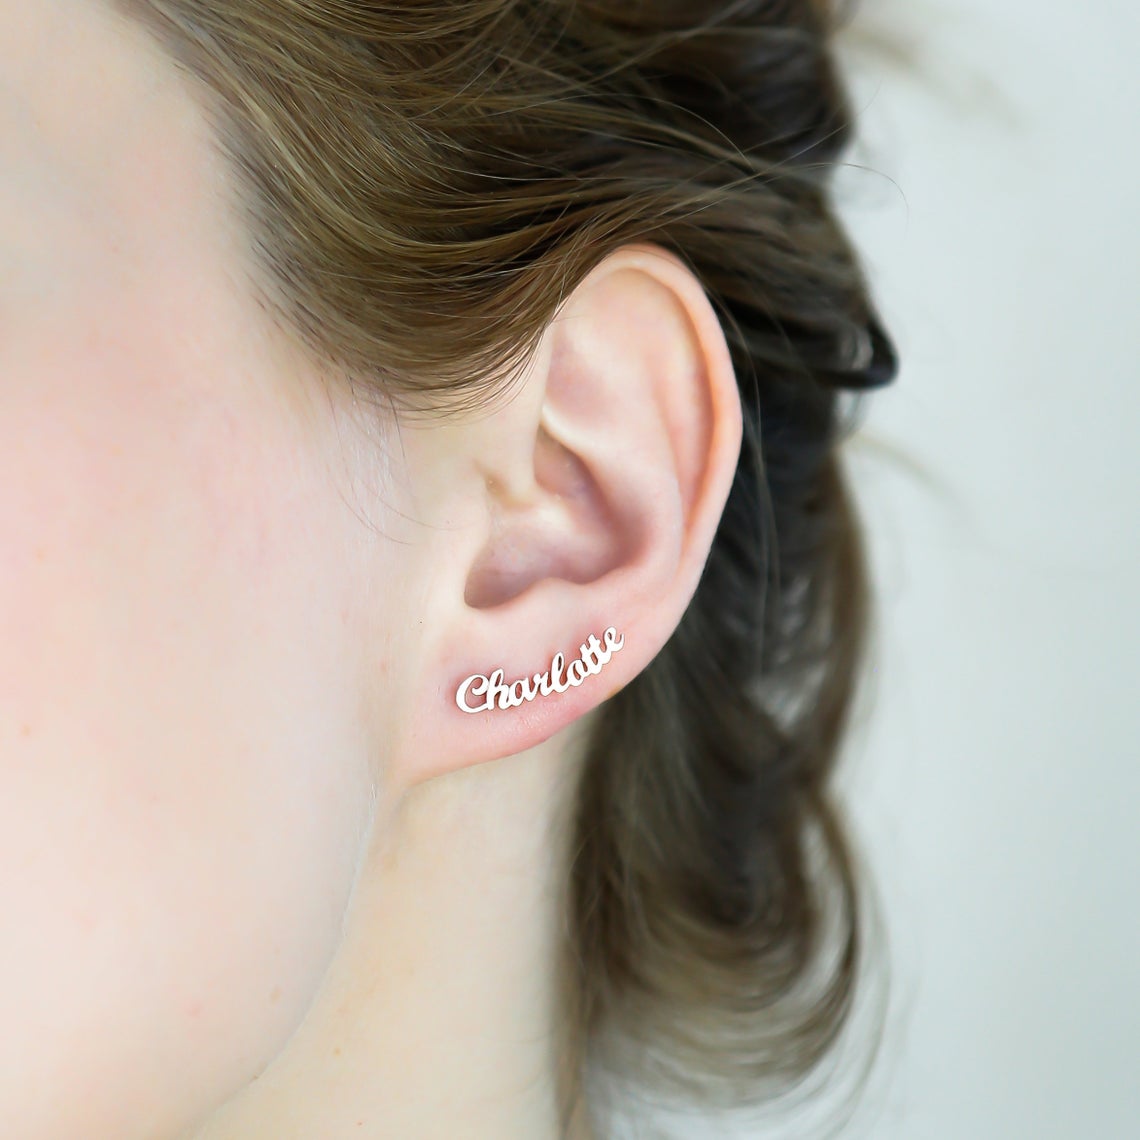 “Be You” Personalized Name Earrings